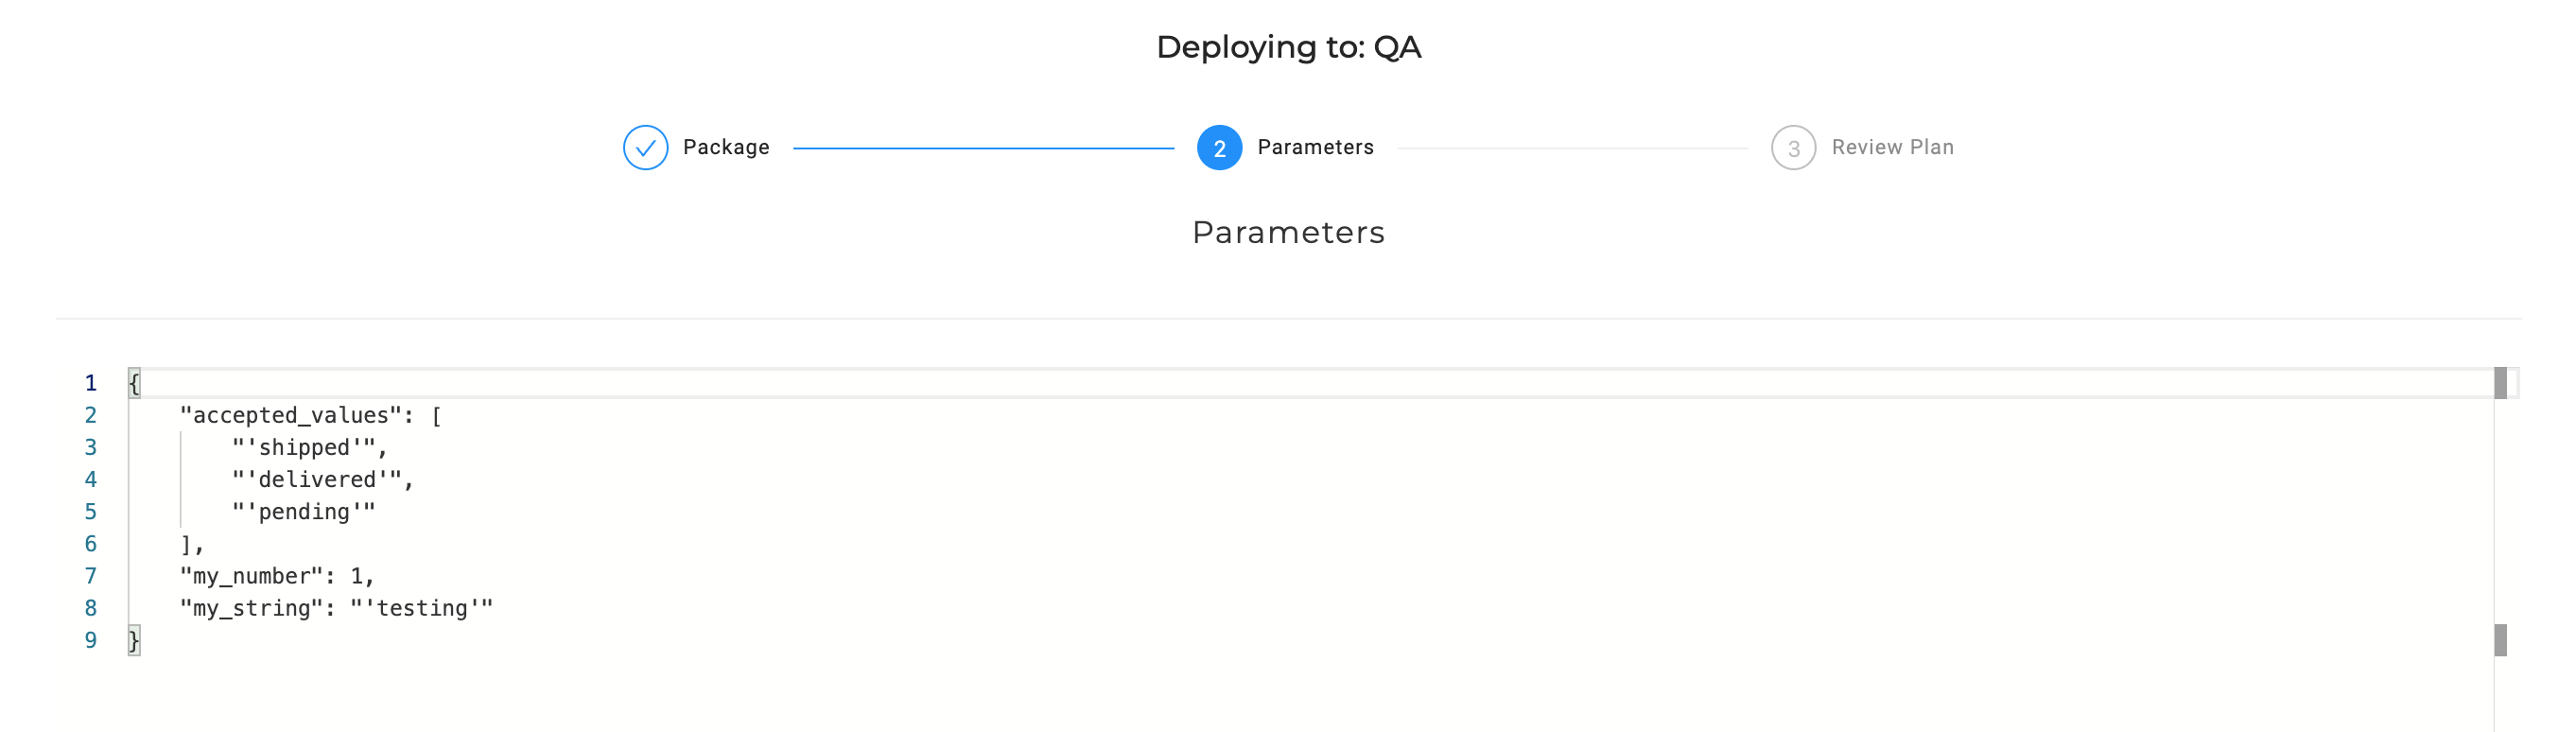 Parameters for deployment